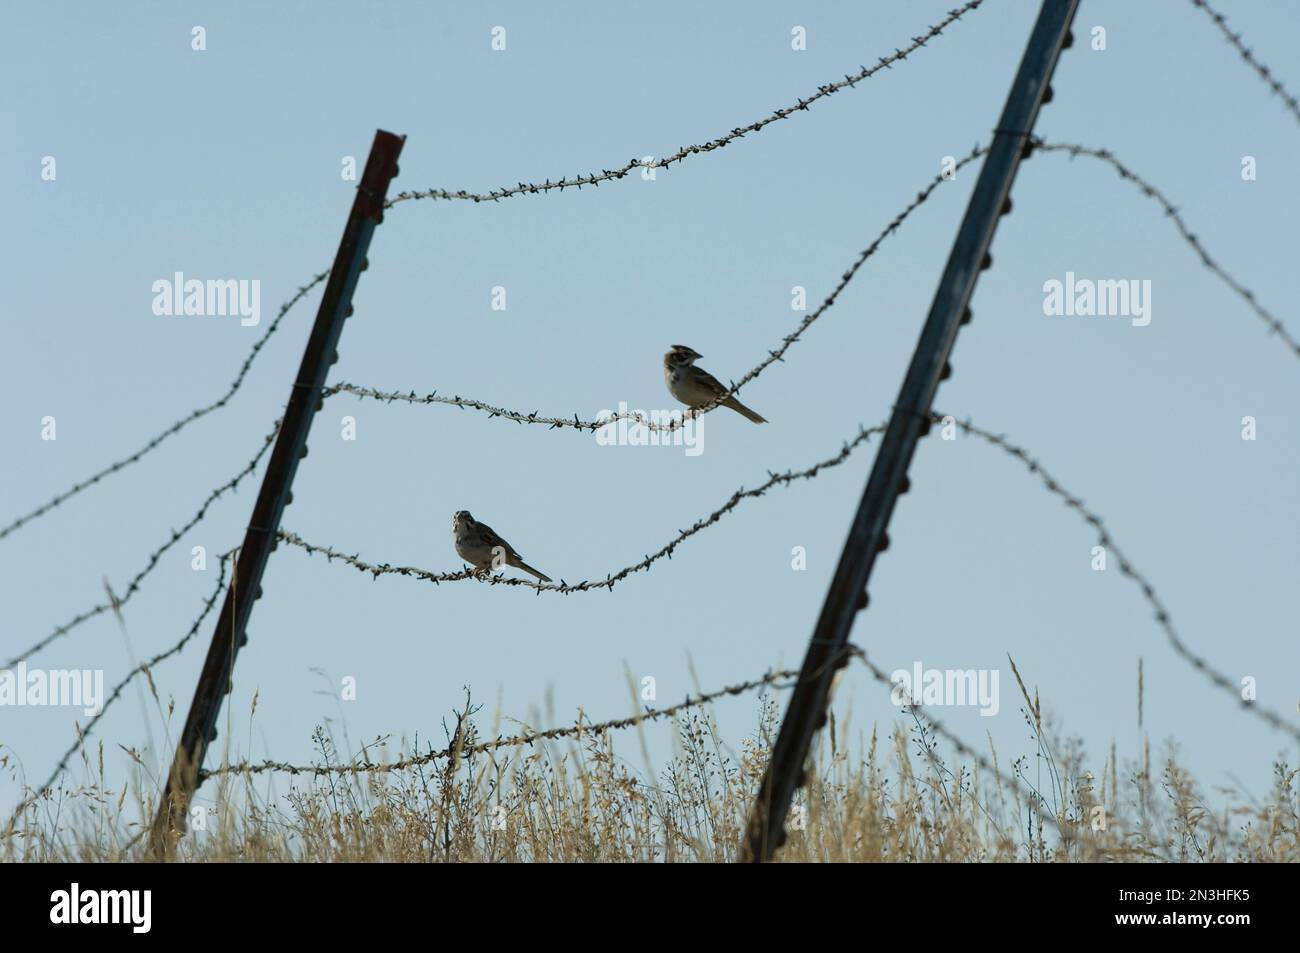 Brown-headed cowbirds (Molothrus ater) sit on a wire in eastern Montana, USA; Malta, Montana, United States of America Stock Photo